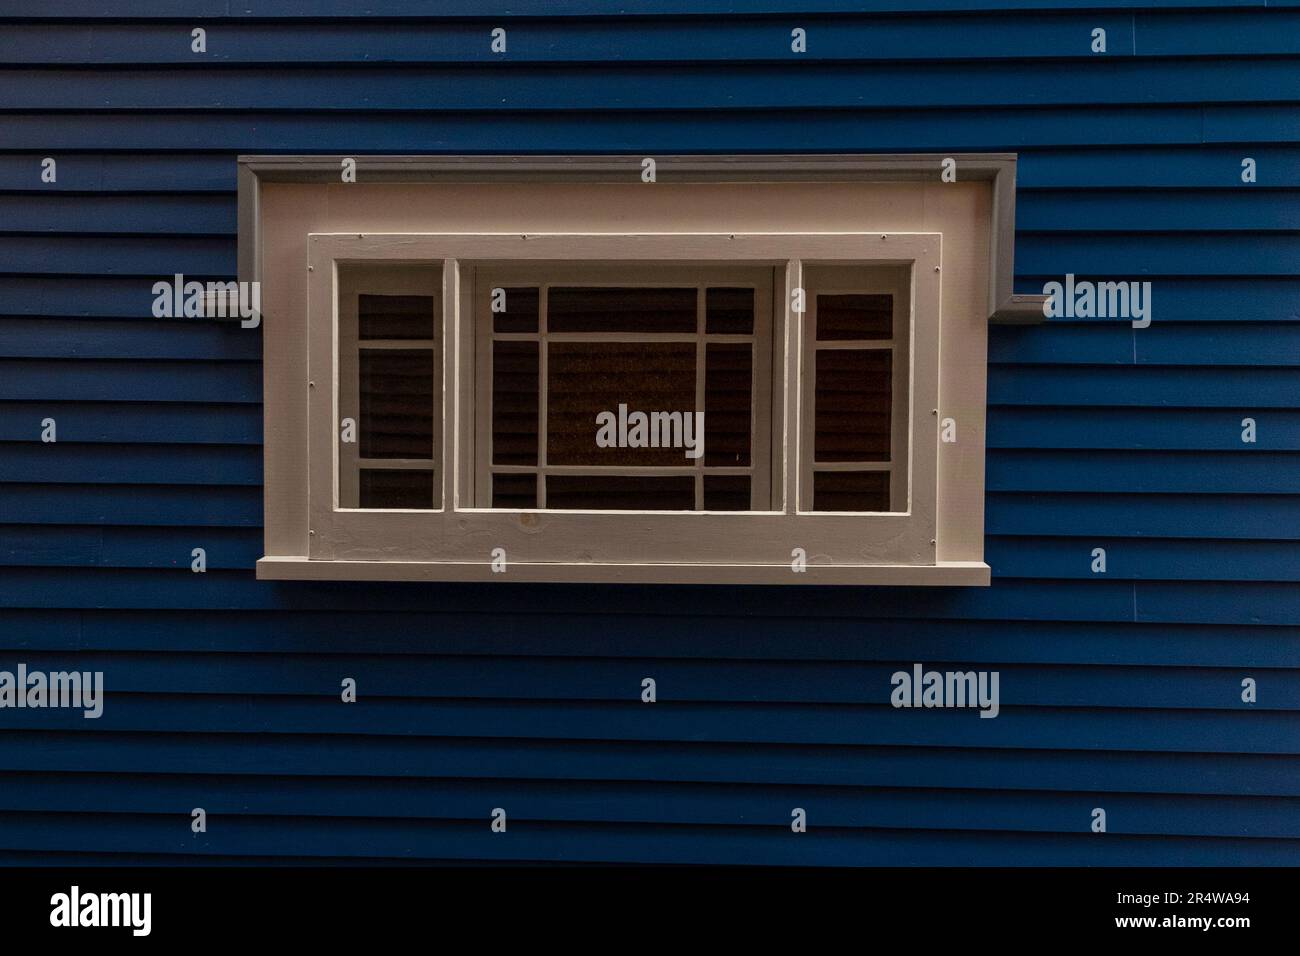 A navy blue painted exterior wall of a house with narrow clapboard siding and a vintage clear glass window with mullions between the panes. Stock Photo